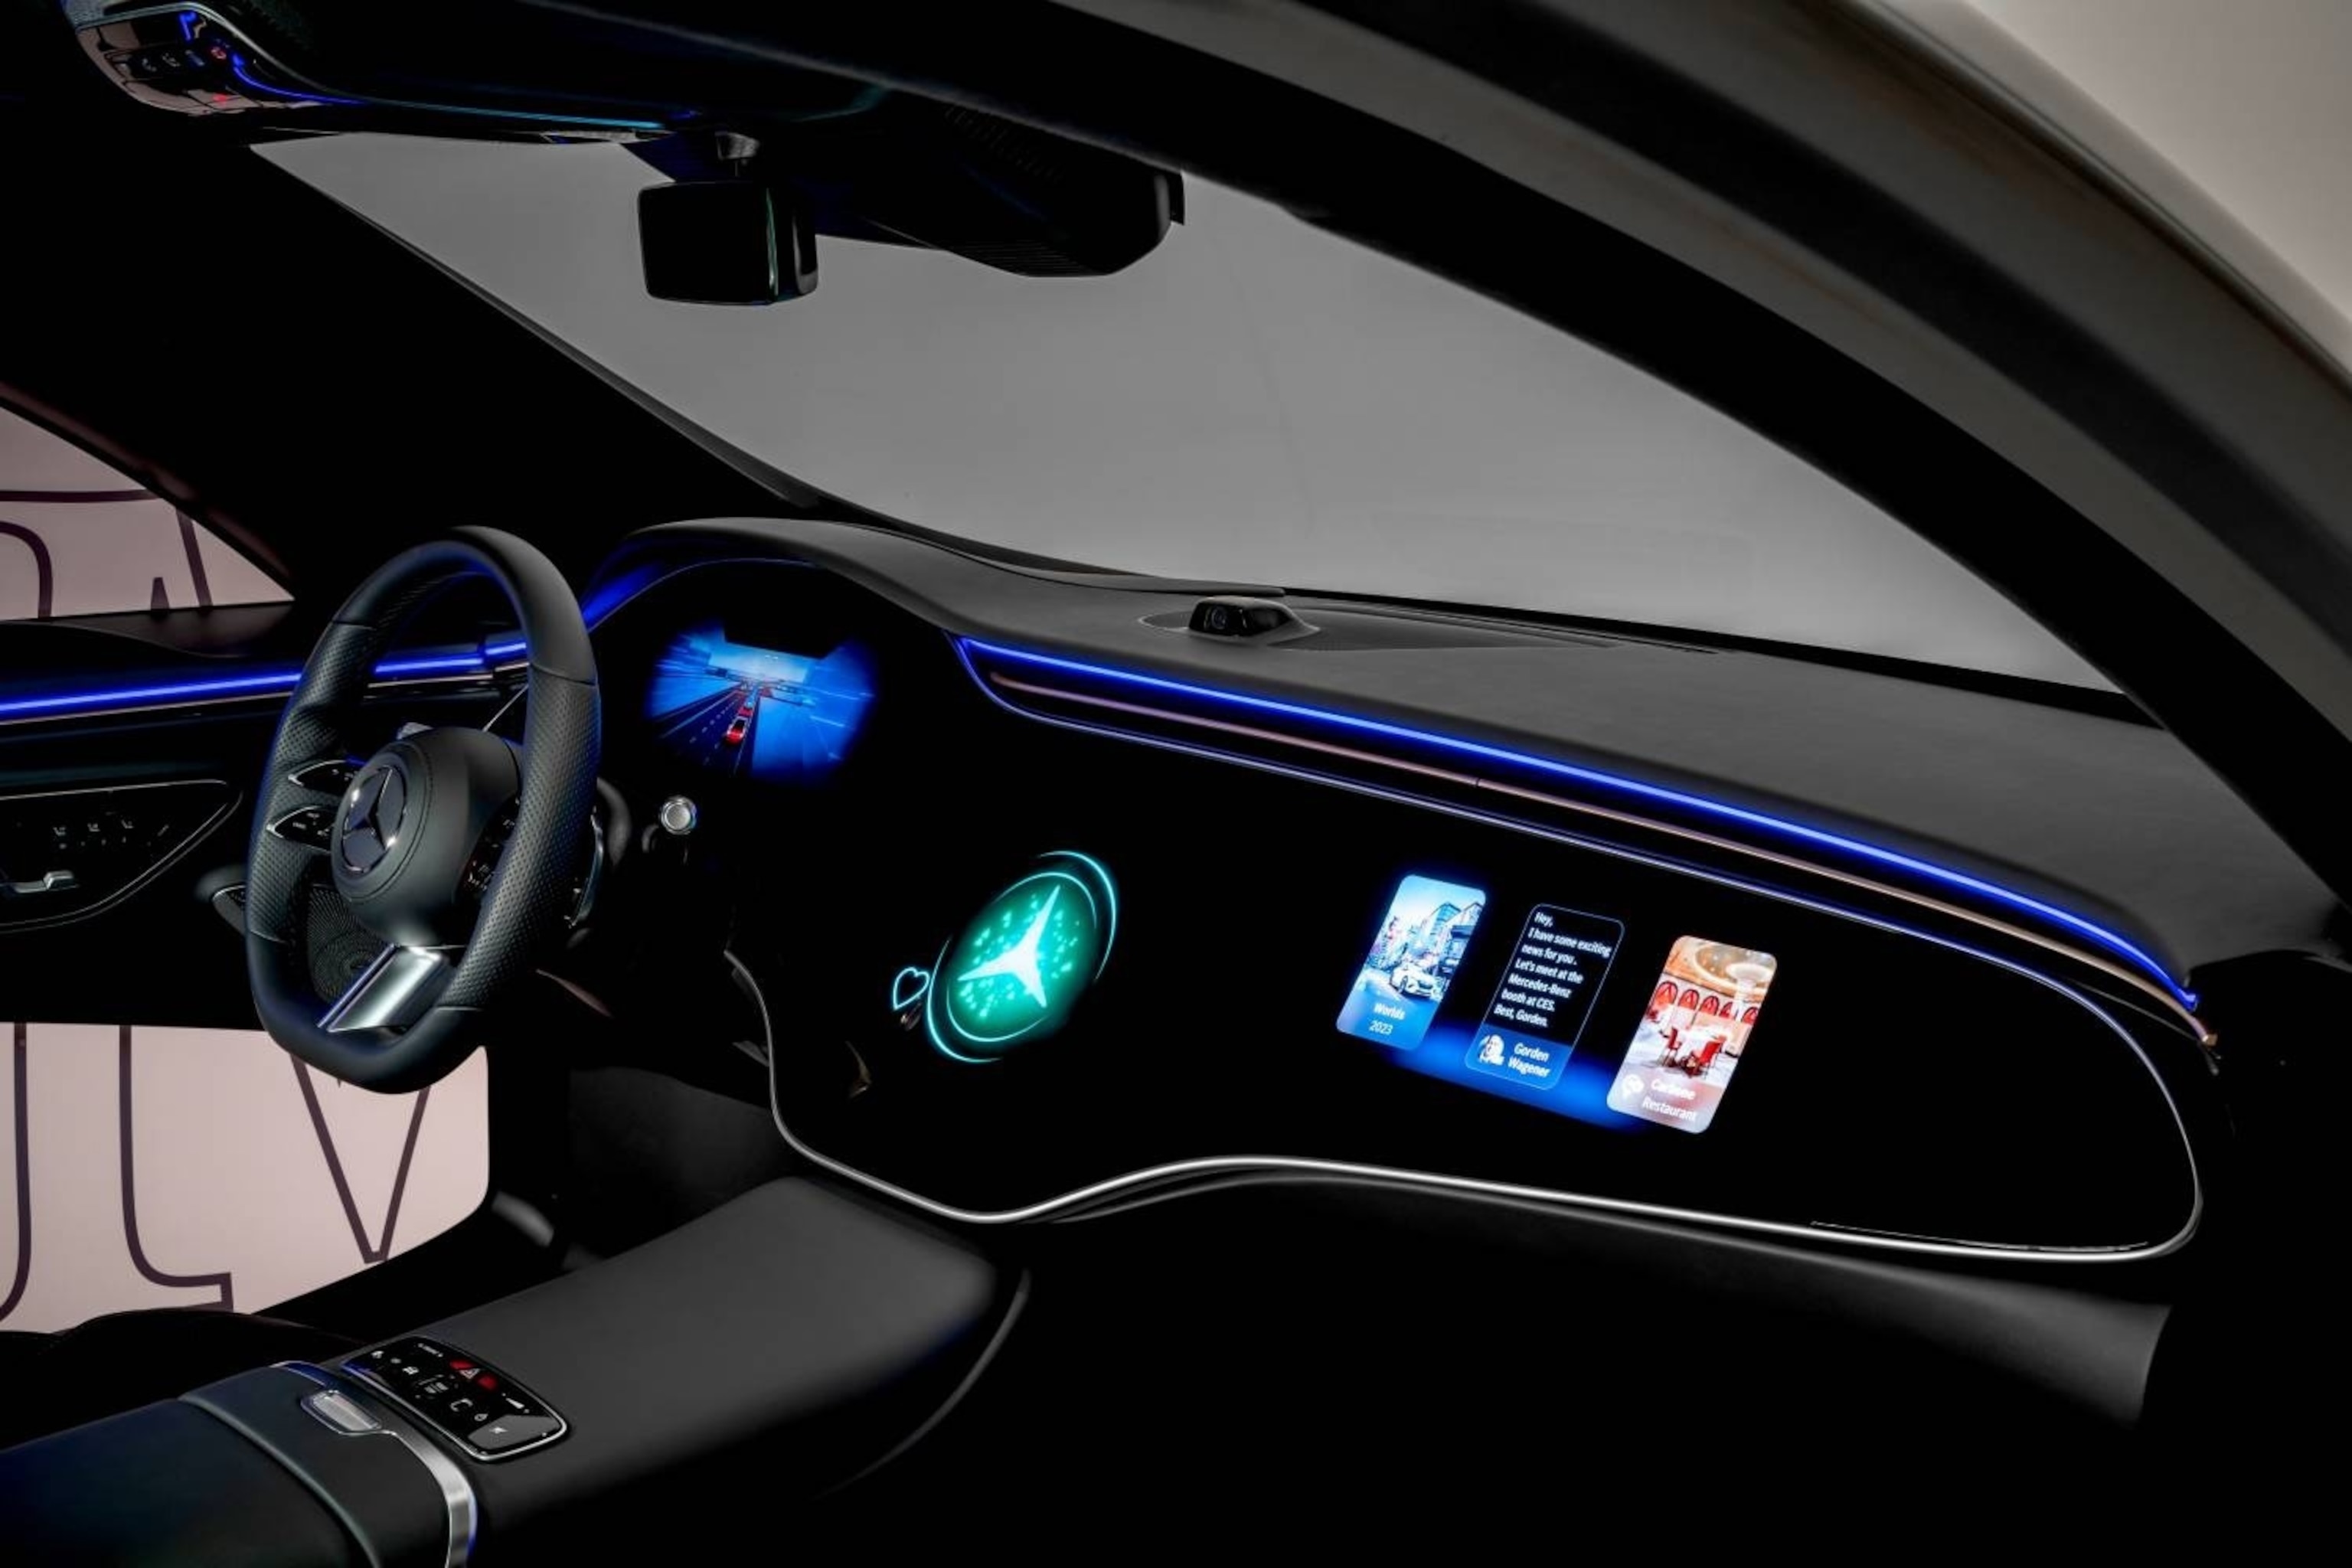 PHOTO: The MBUX virtual assistant "is the most human-like interface with a Mercedes-Benz yet," according to the company, and advanced 3D graphics make interactions with the driver more natural, intuitive and personalized. 